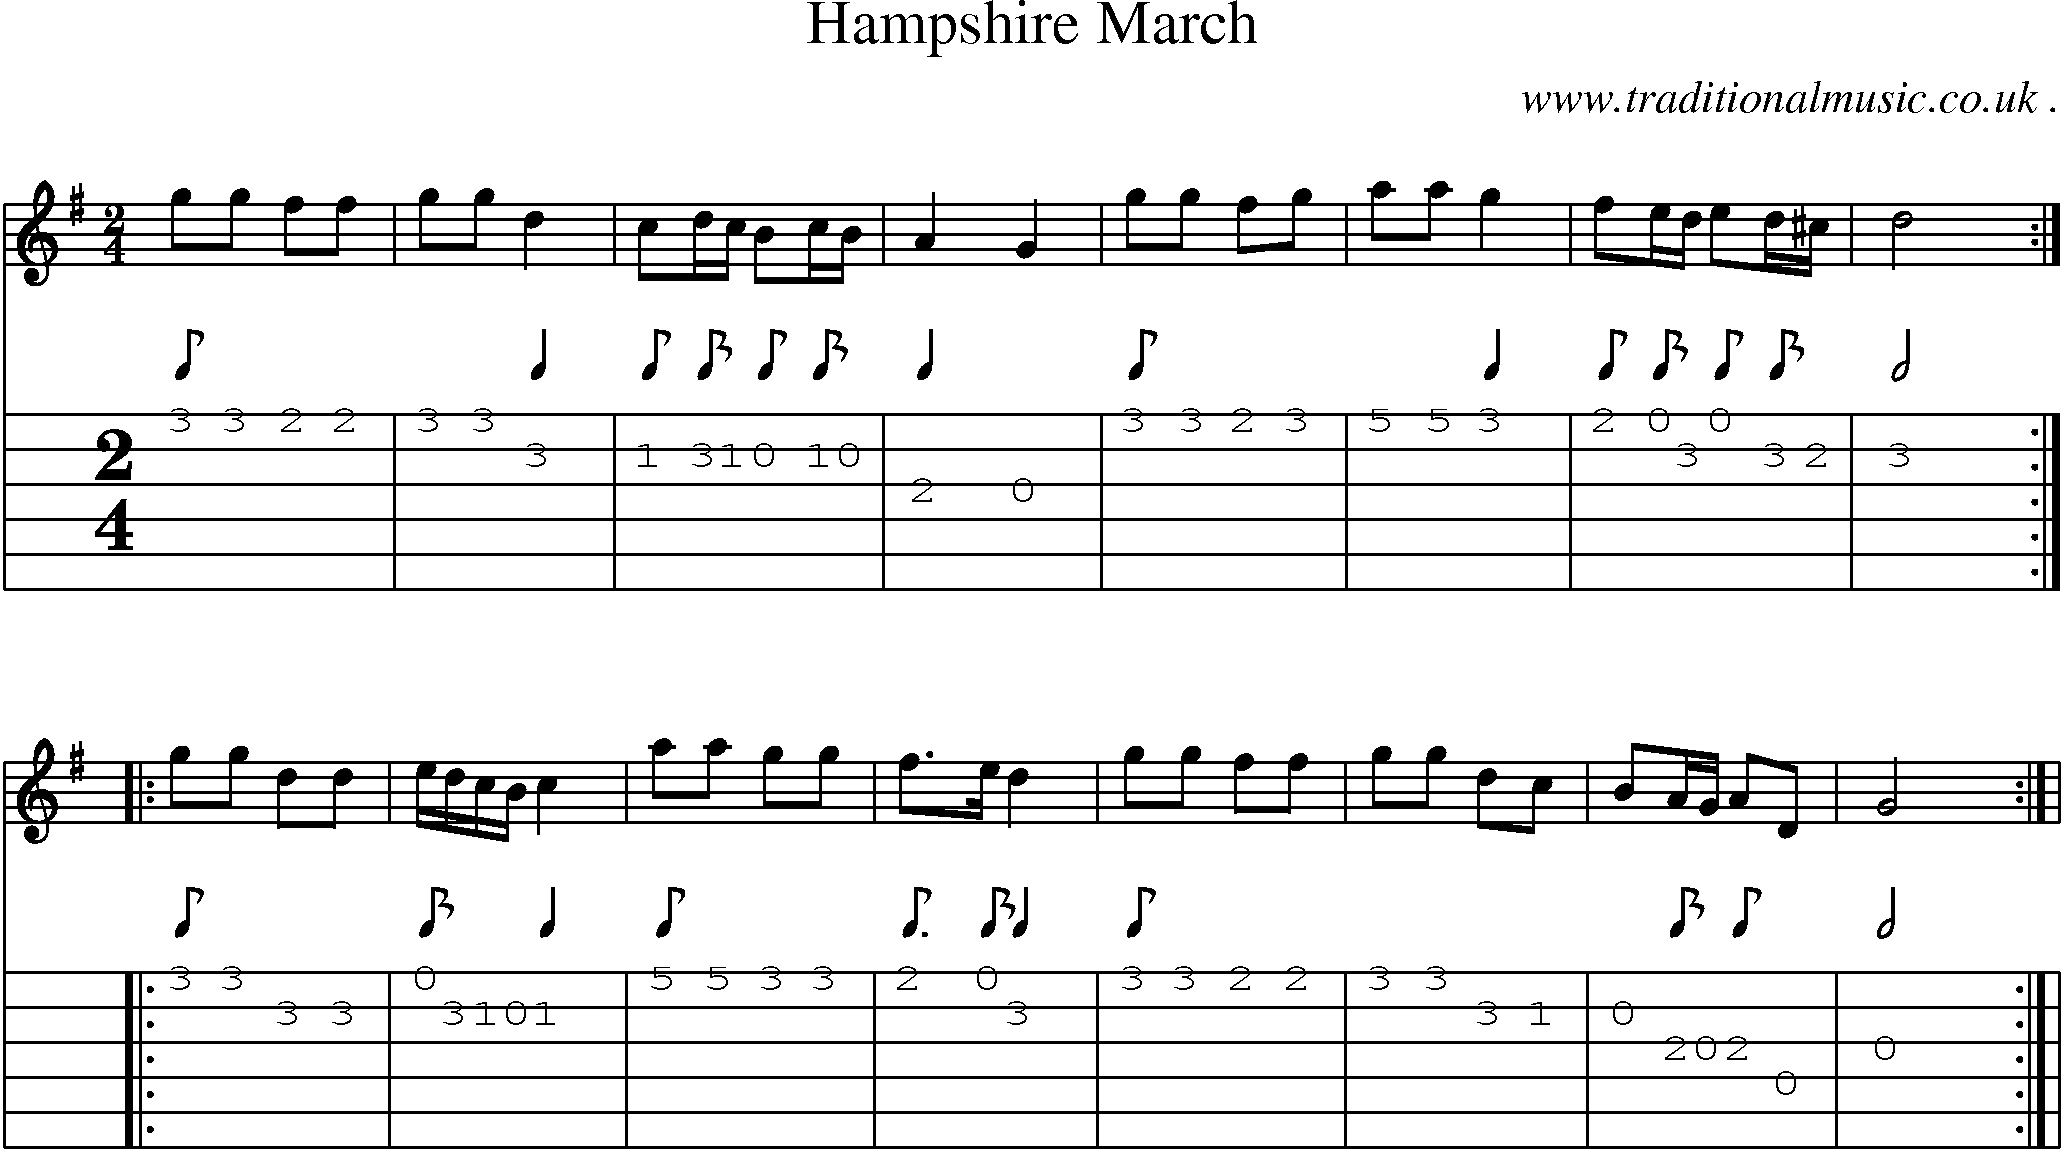 Sheet-Music and Guitar Tabs for Hampshire March